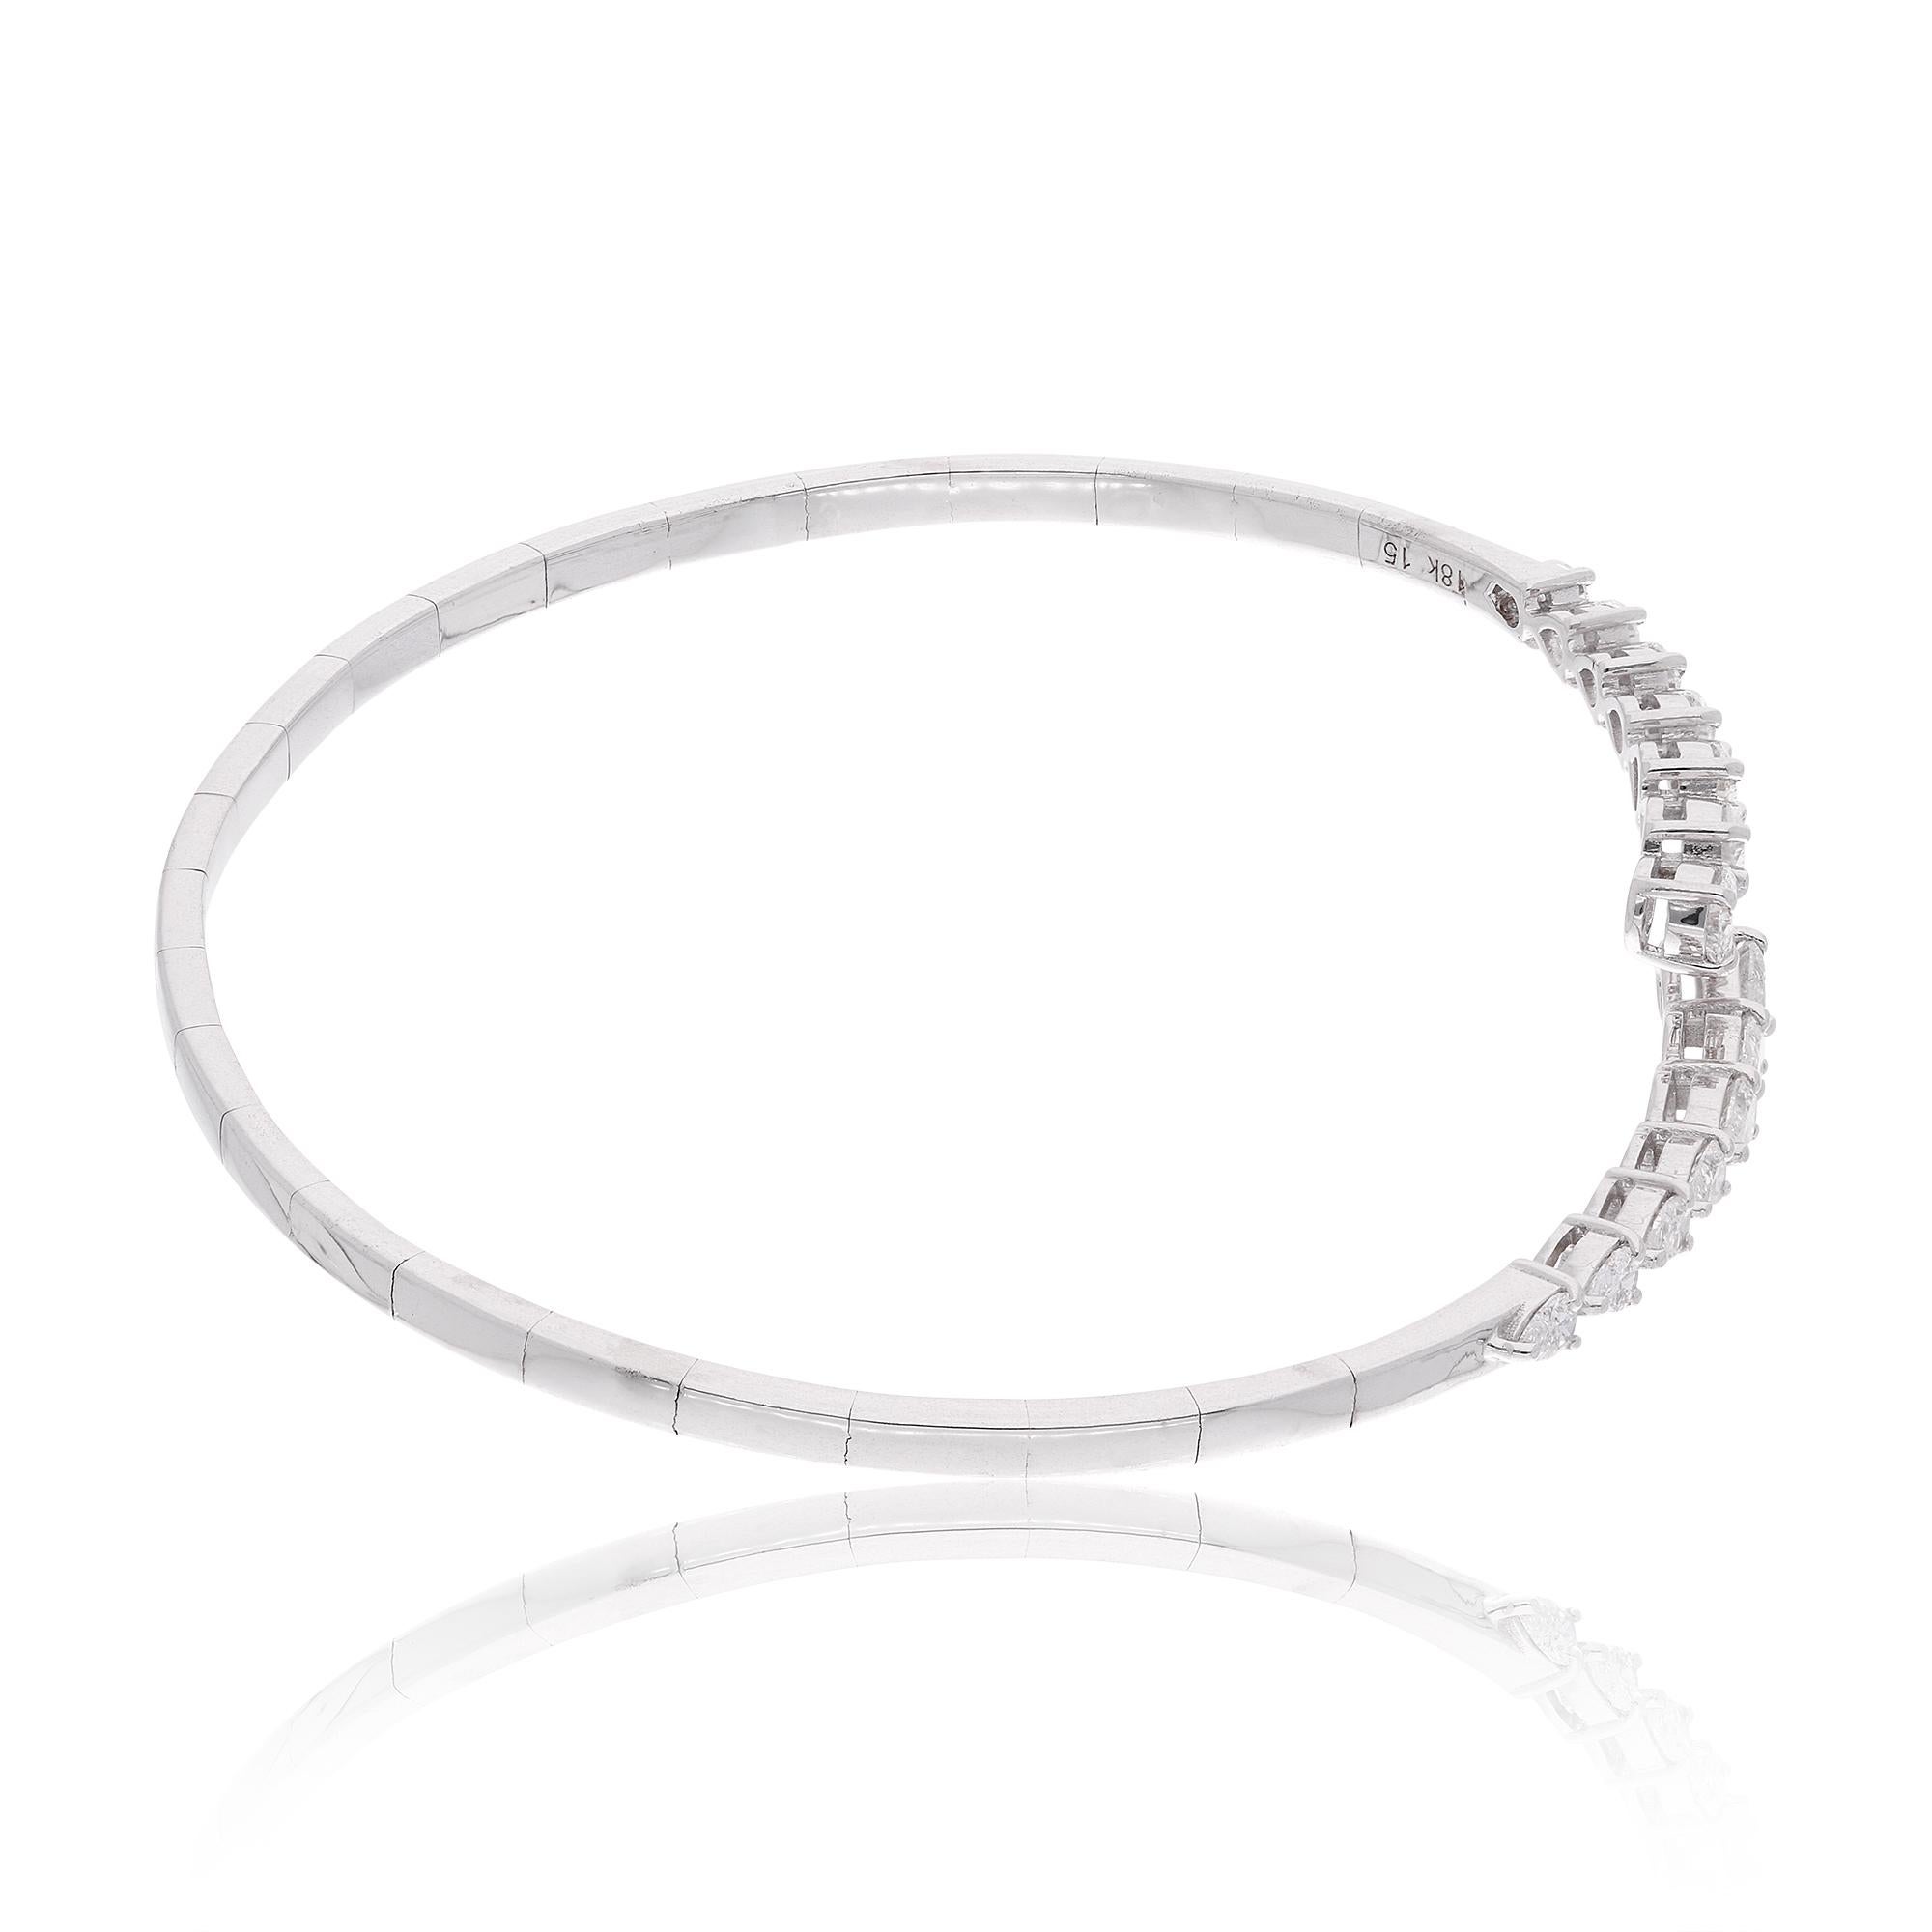 1.32 Ct. Diamond Cuff Bracelet, Pear Cut Diamond Bangle Bracelet, 18k White Gold Genuine Diamond Bracelet, Open Cuff Bangle Diamond Jewelry

This dainty diamond bracelet is a promise of perfection and purity. Gift this little piece of happiness to